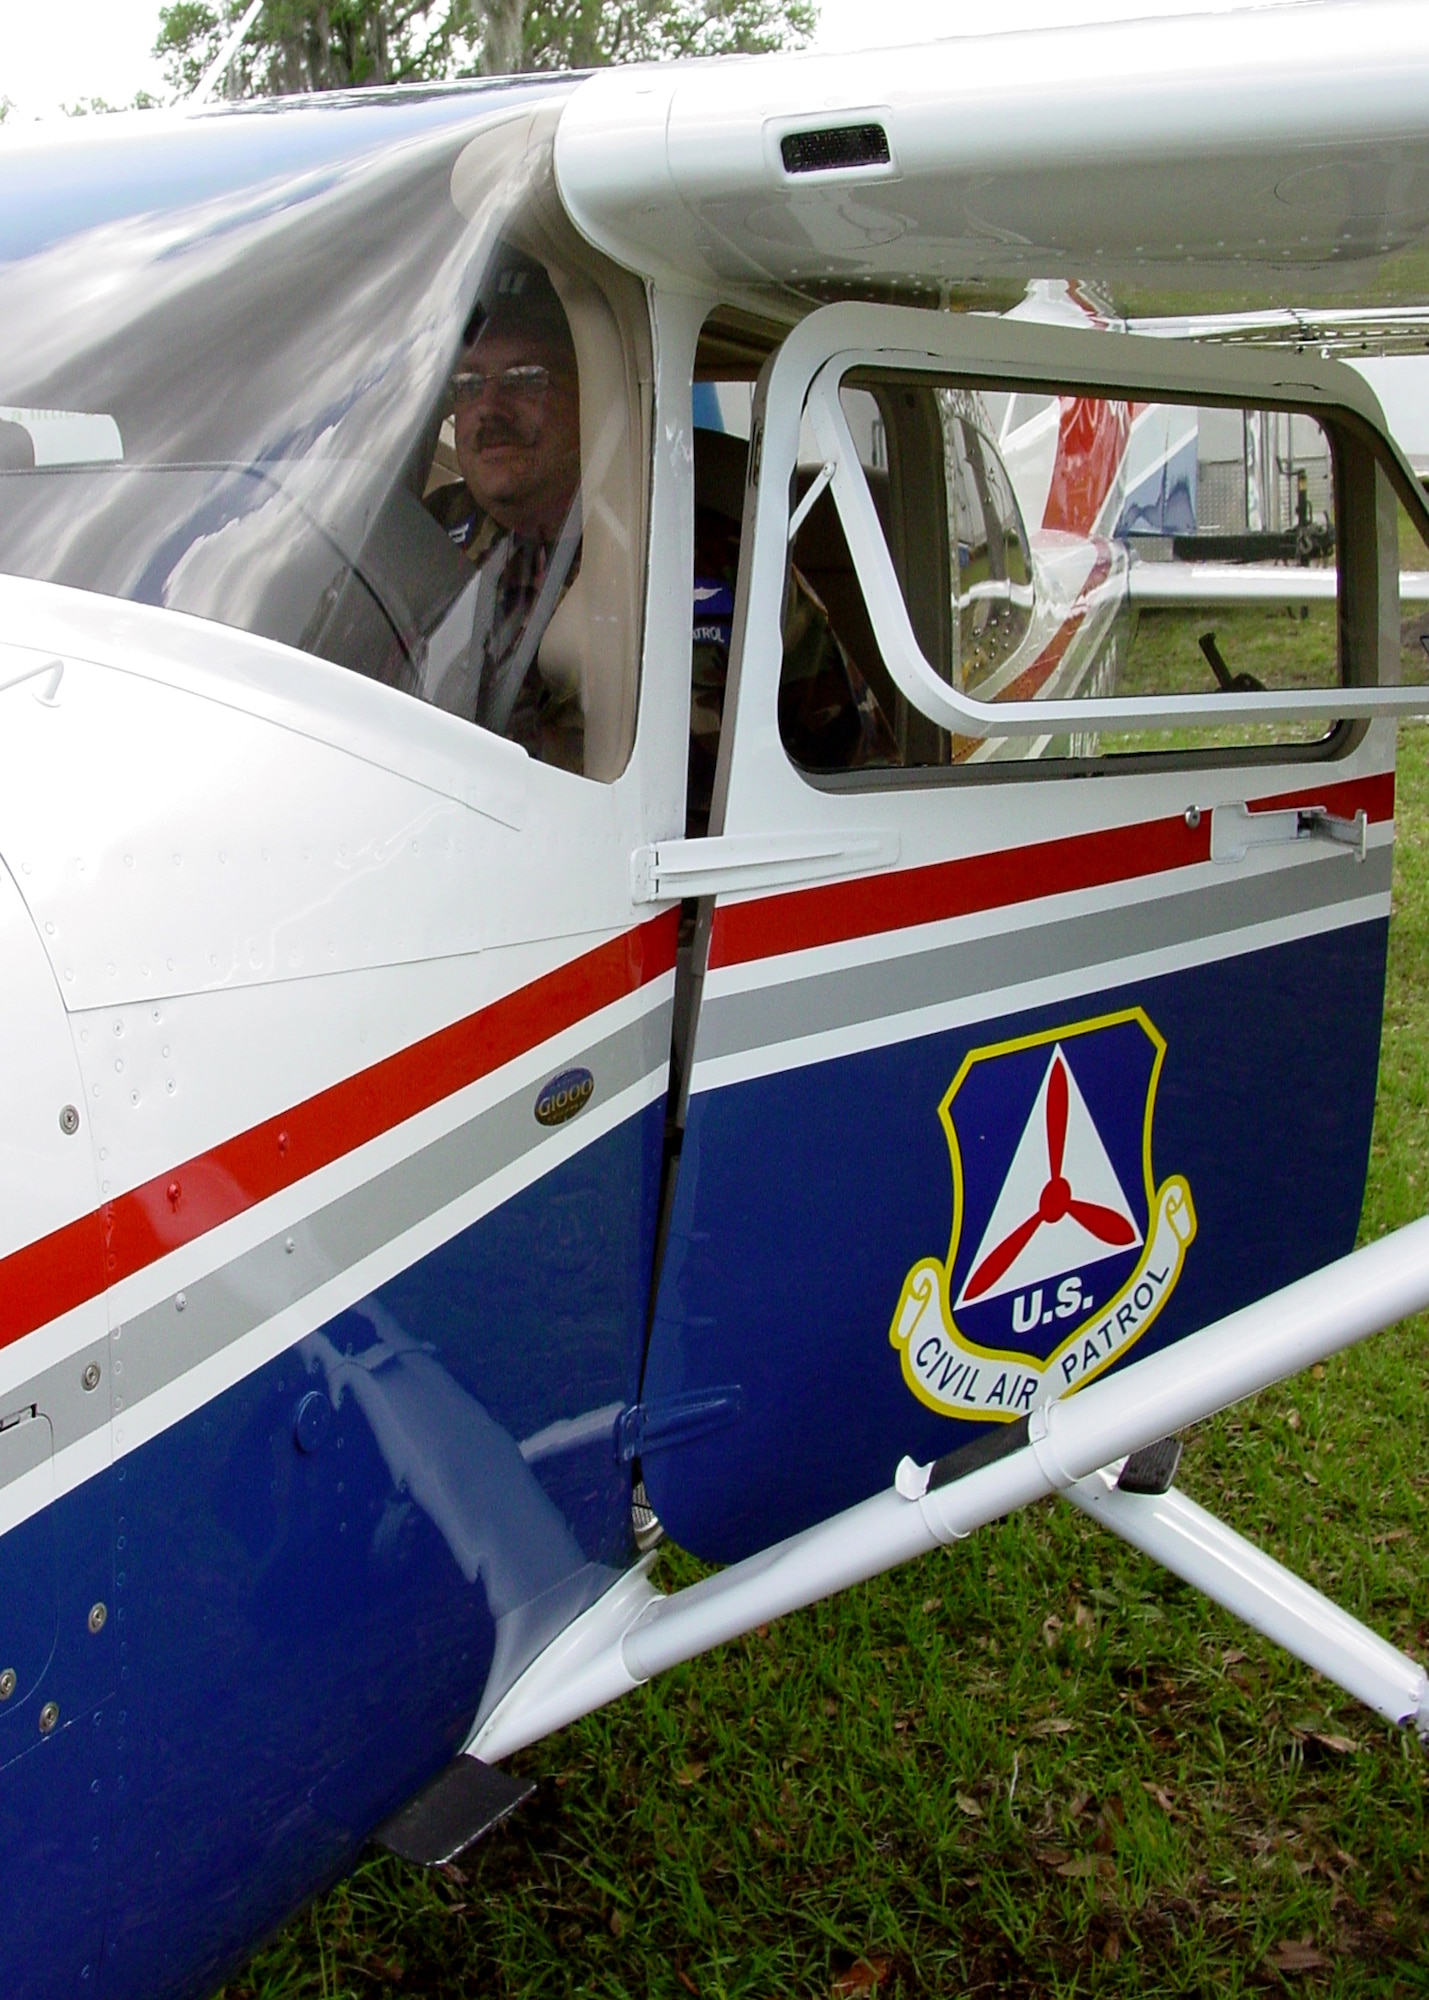 Civil Air Patrol Captain Len Goellner sits in the cockpit of a Florida Civil Air Patrol Cessna 182-T here.  As a precautionary measure the Air Force Rescue Coordination Center and CAP have pre-positioned aircraft and Airmen to provide search and rescue services if needed.  US Air Force photos by Mike Strickler.               